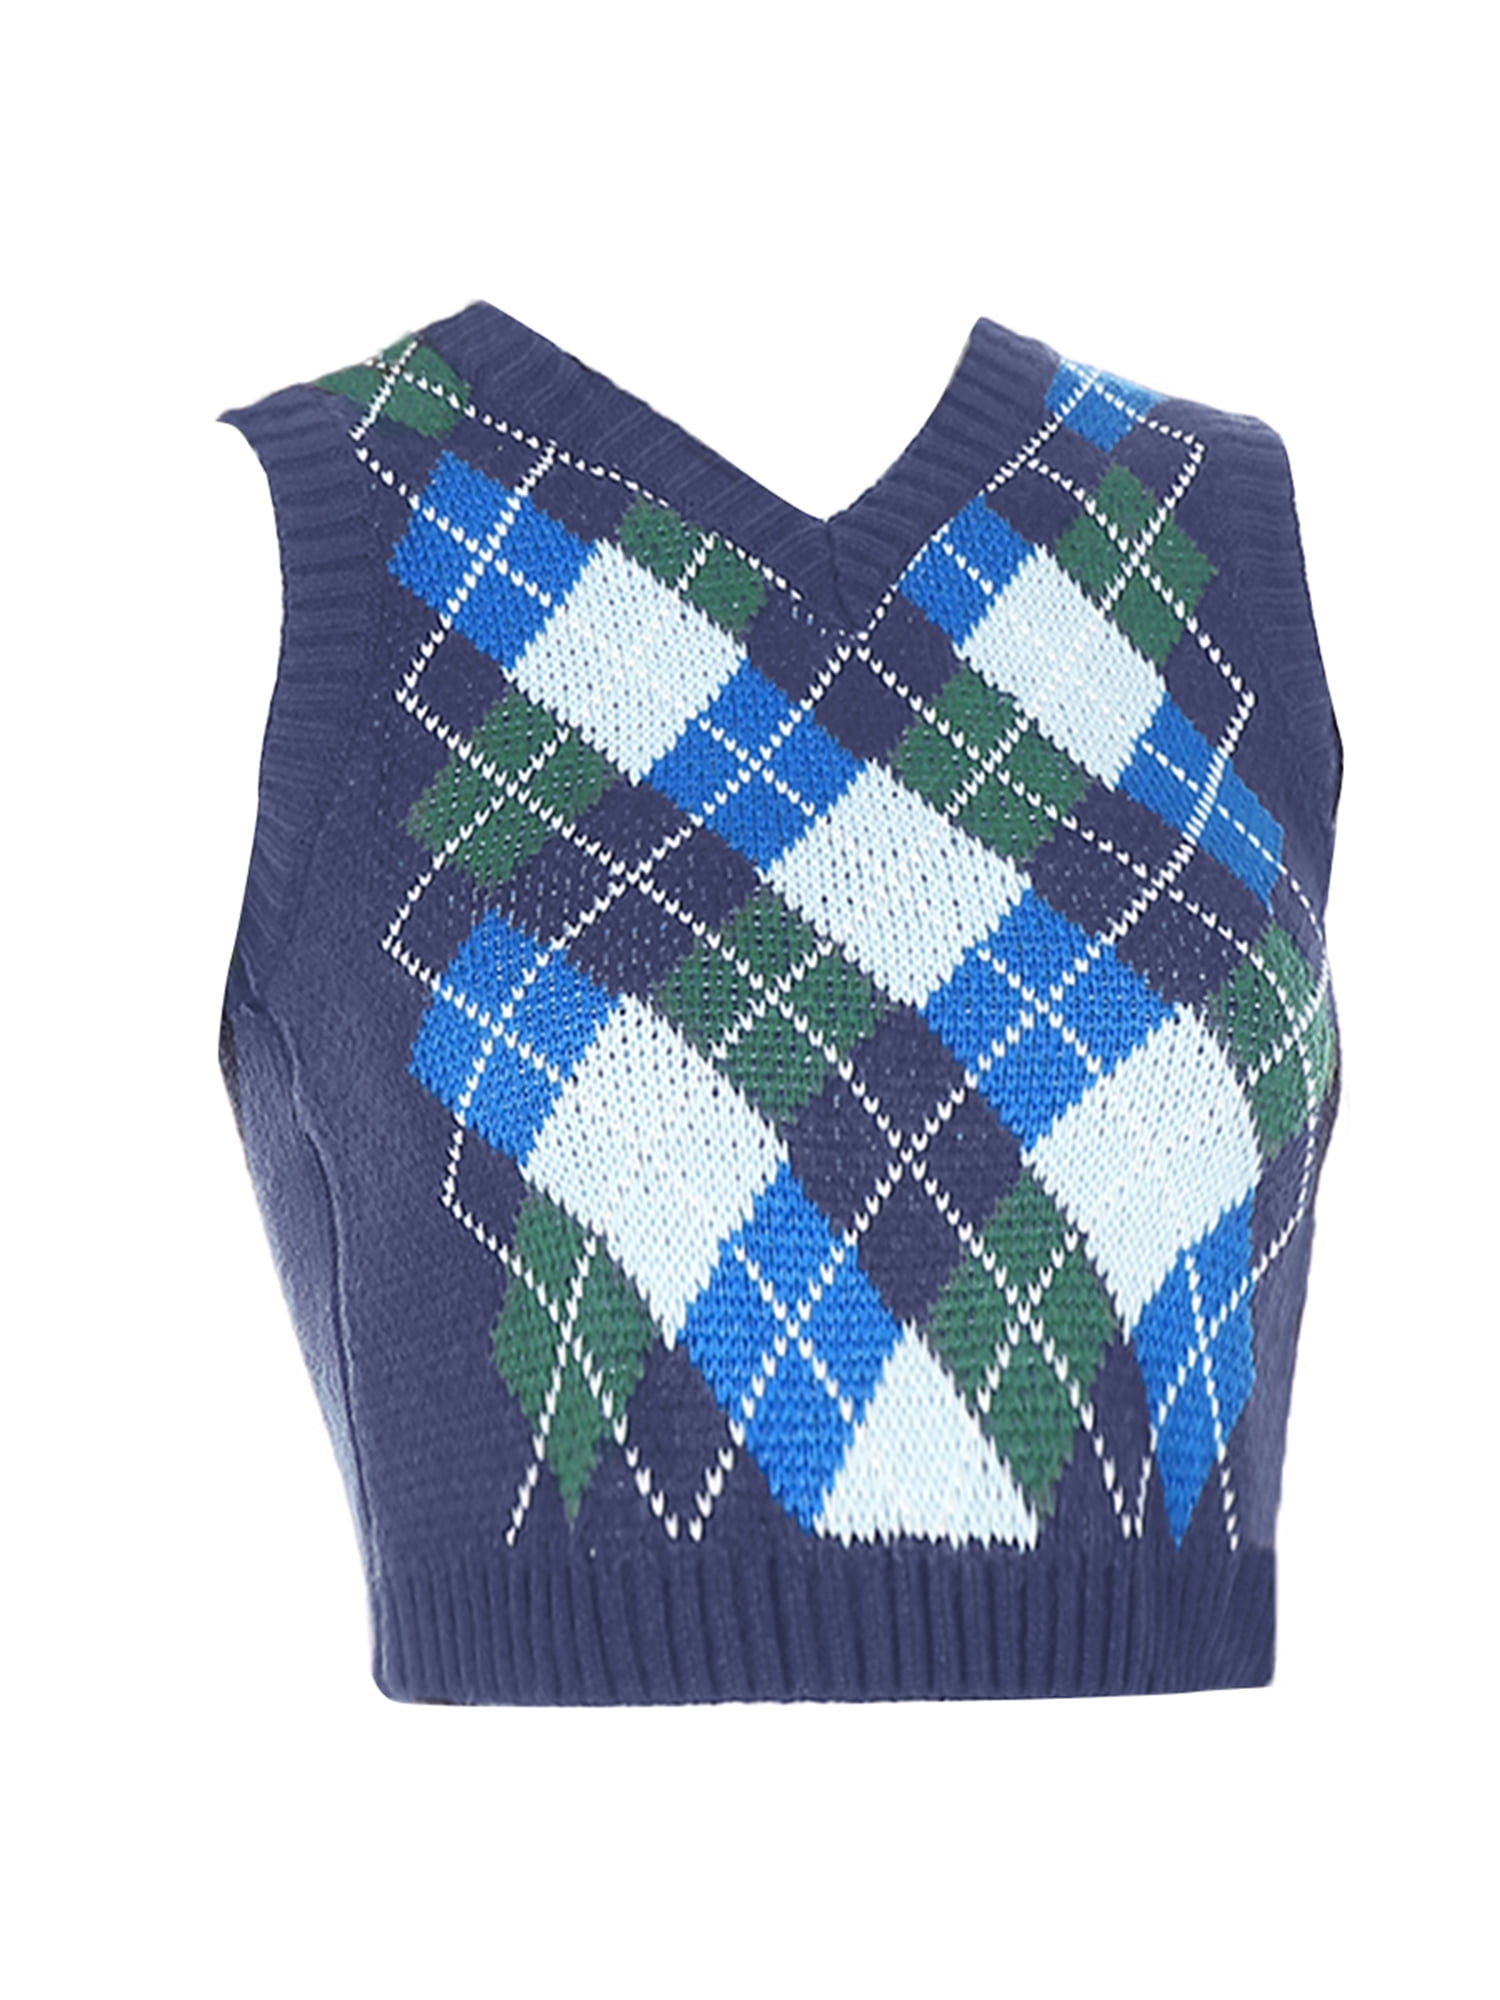 COUTEXYI Woman´s Woolen Sweater Vest Retro Knitted Bare Midriff ...